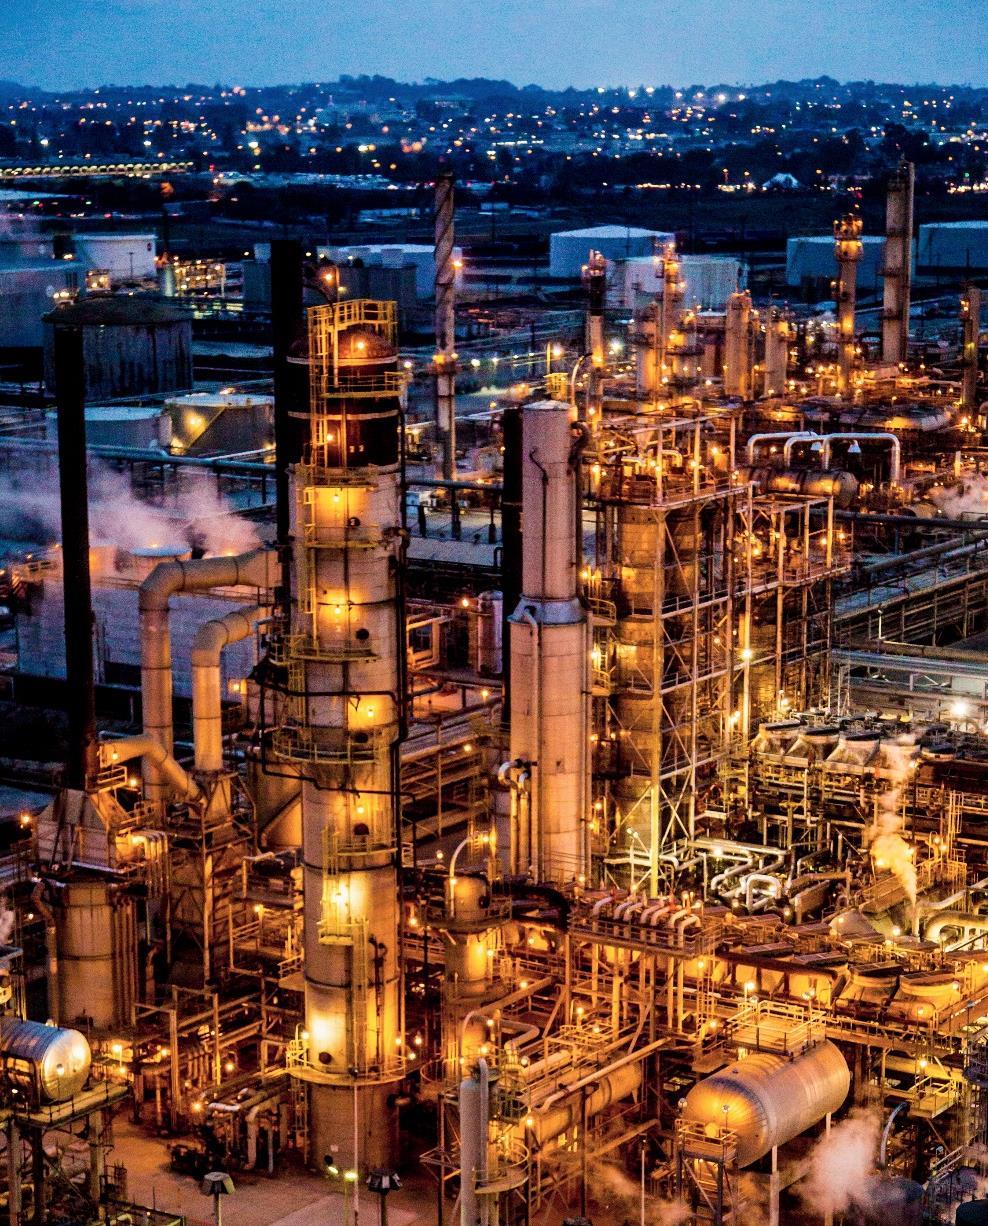 Torrance Refinery Focus on Operations Focus on stable and reliable operations Executed first major turnarounds in the second quarter of 2017 Putting the right team in place to execute Achieving